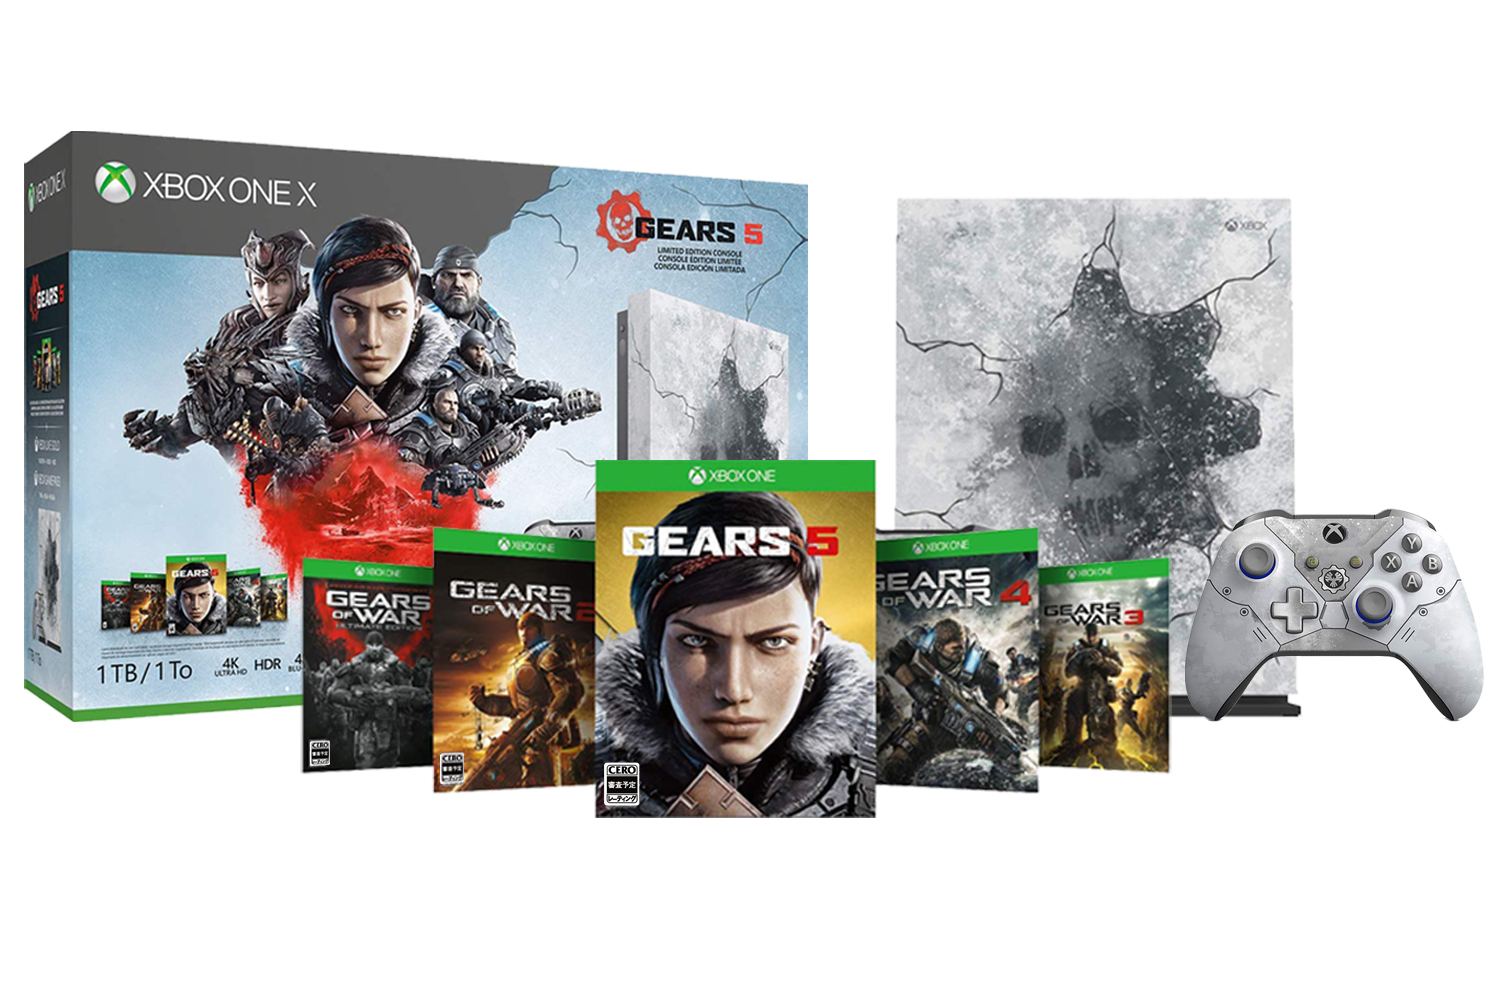 xbox one x special edition gears of war